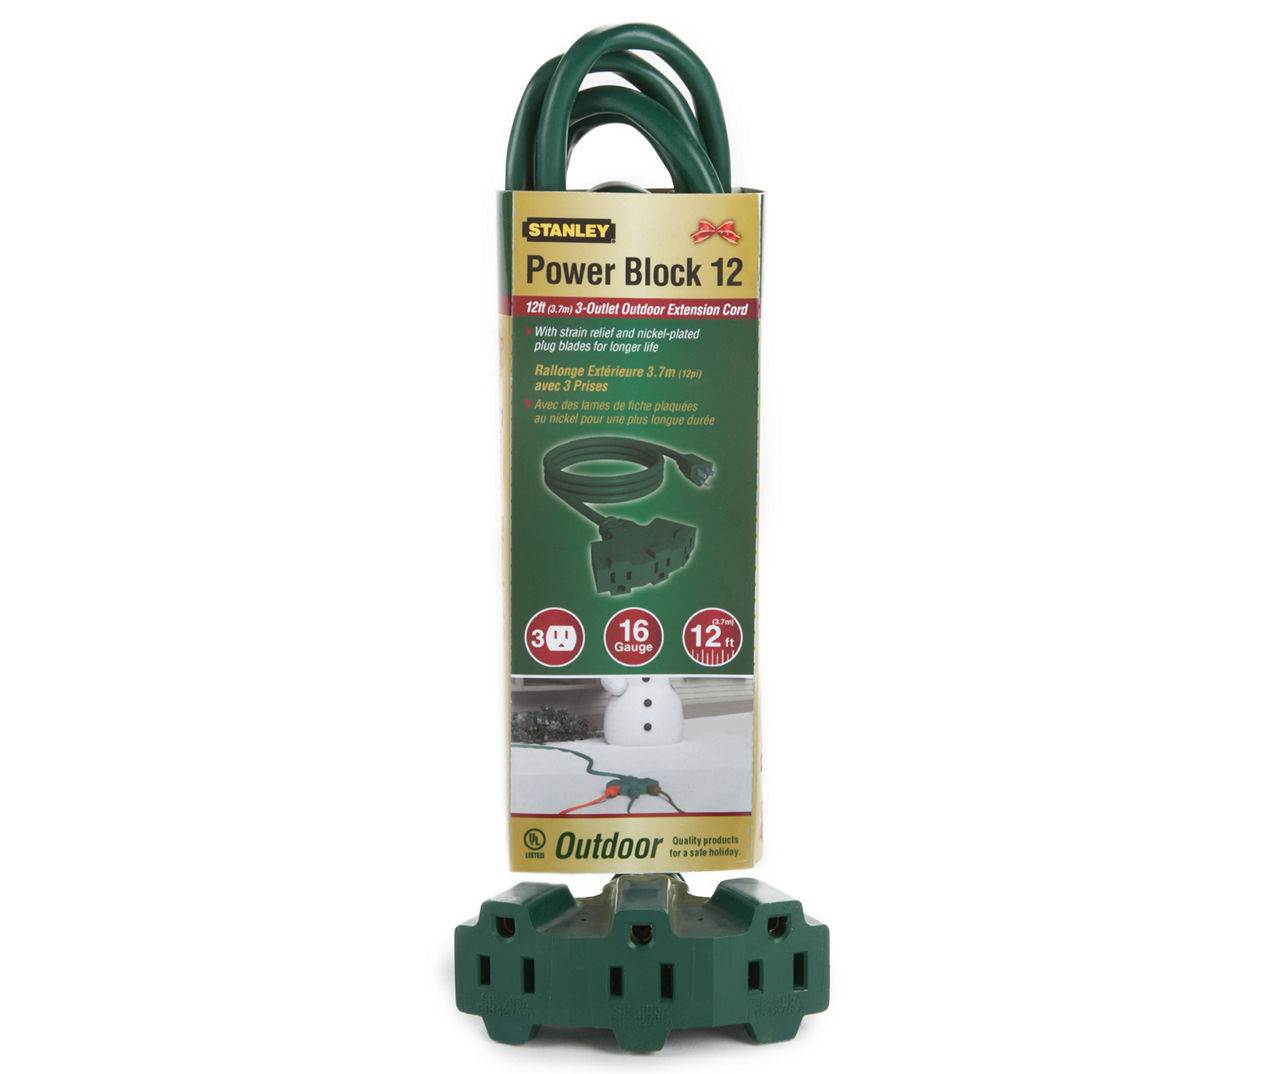 Stanley Power Block 3-Outlet Outdoor Extension Cord